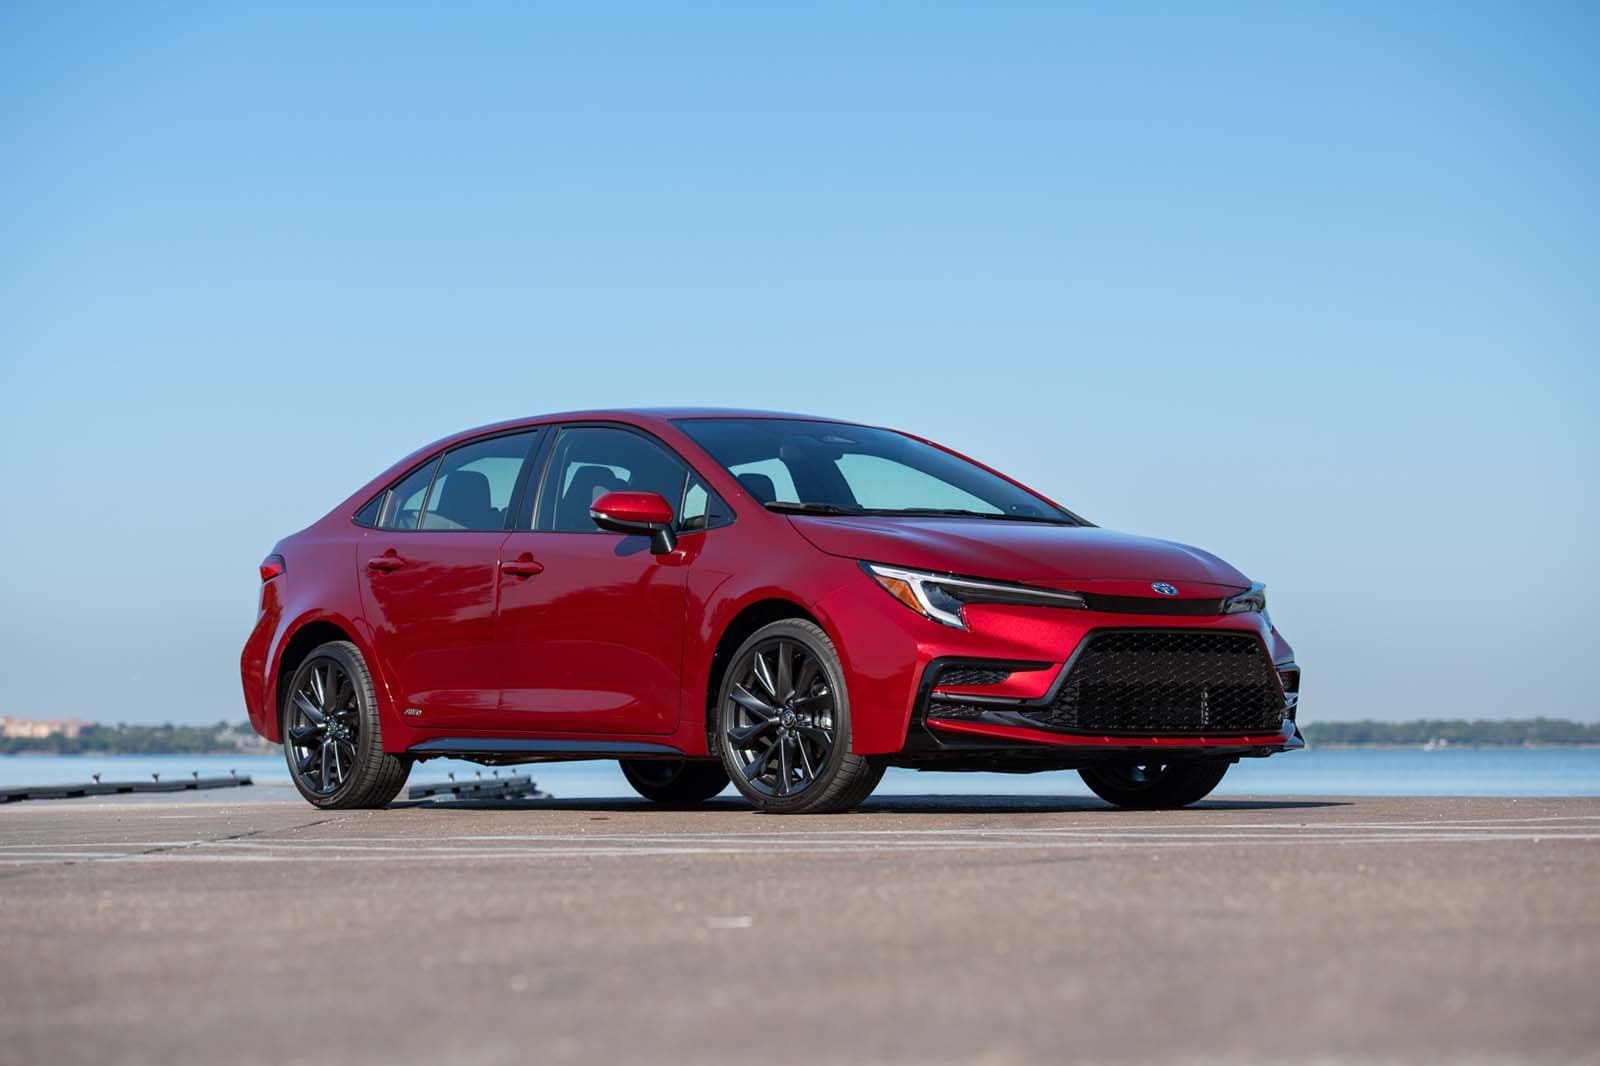 Driven: The Refreshed 2023 Toyota Corolla Hybrid Makes a Noisy Debut